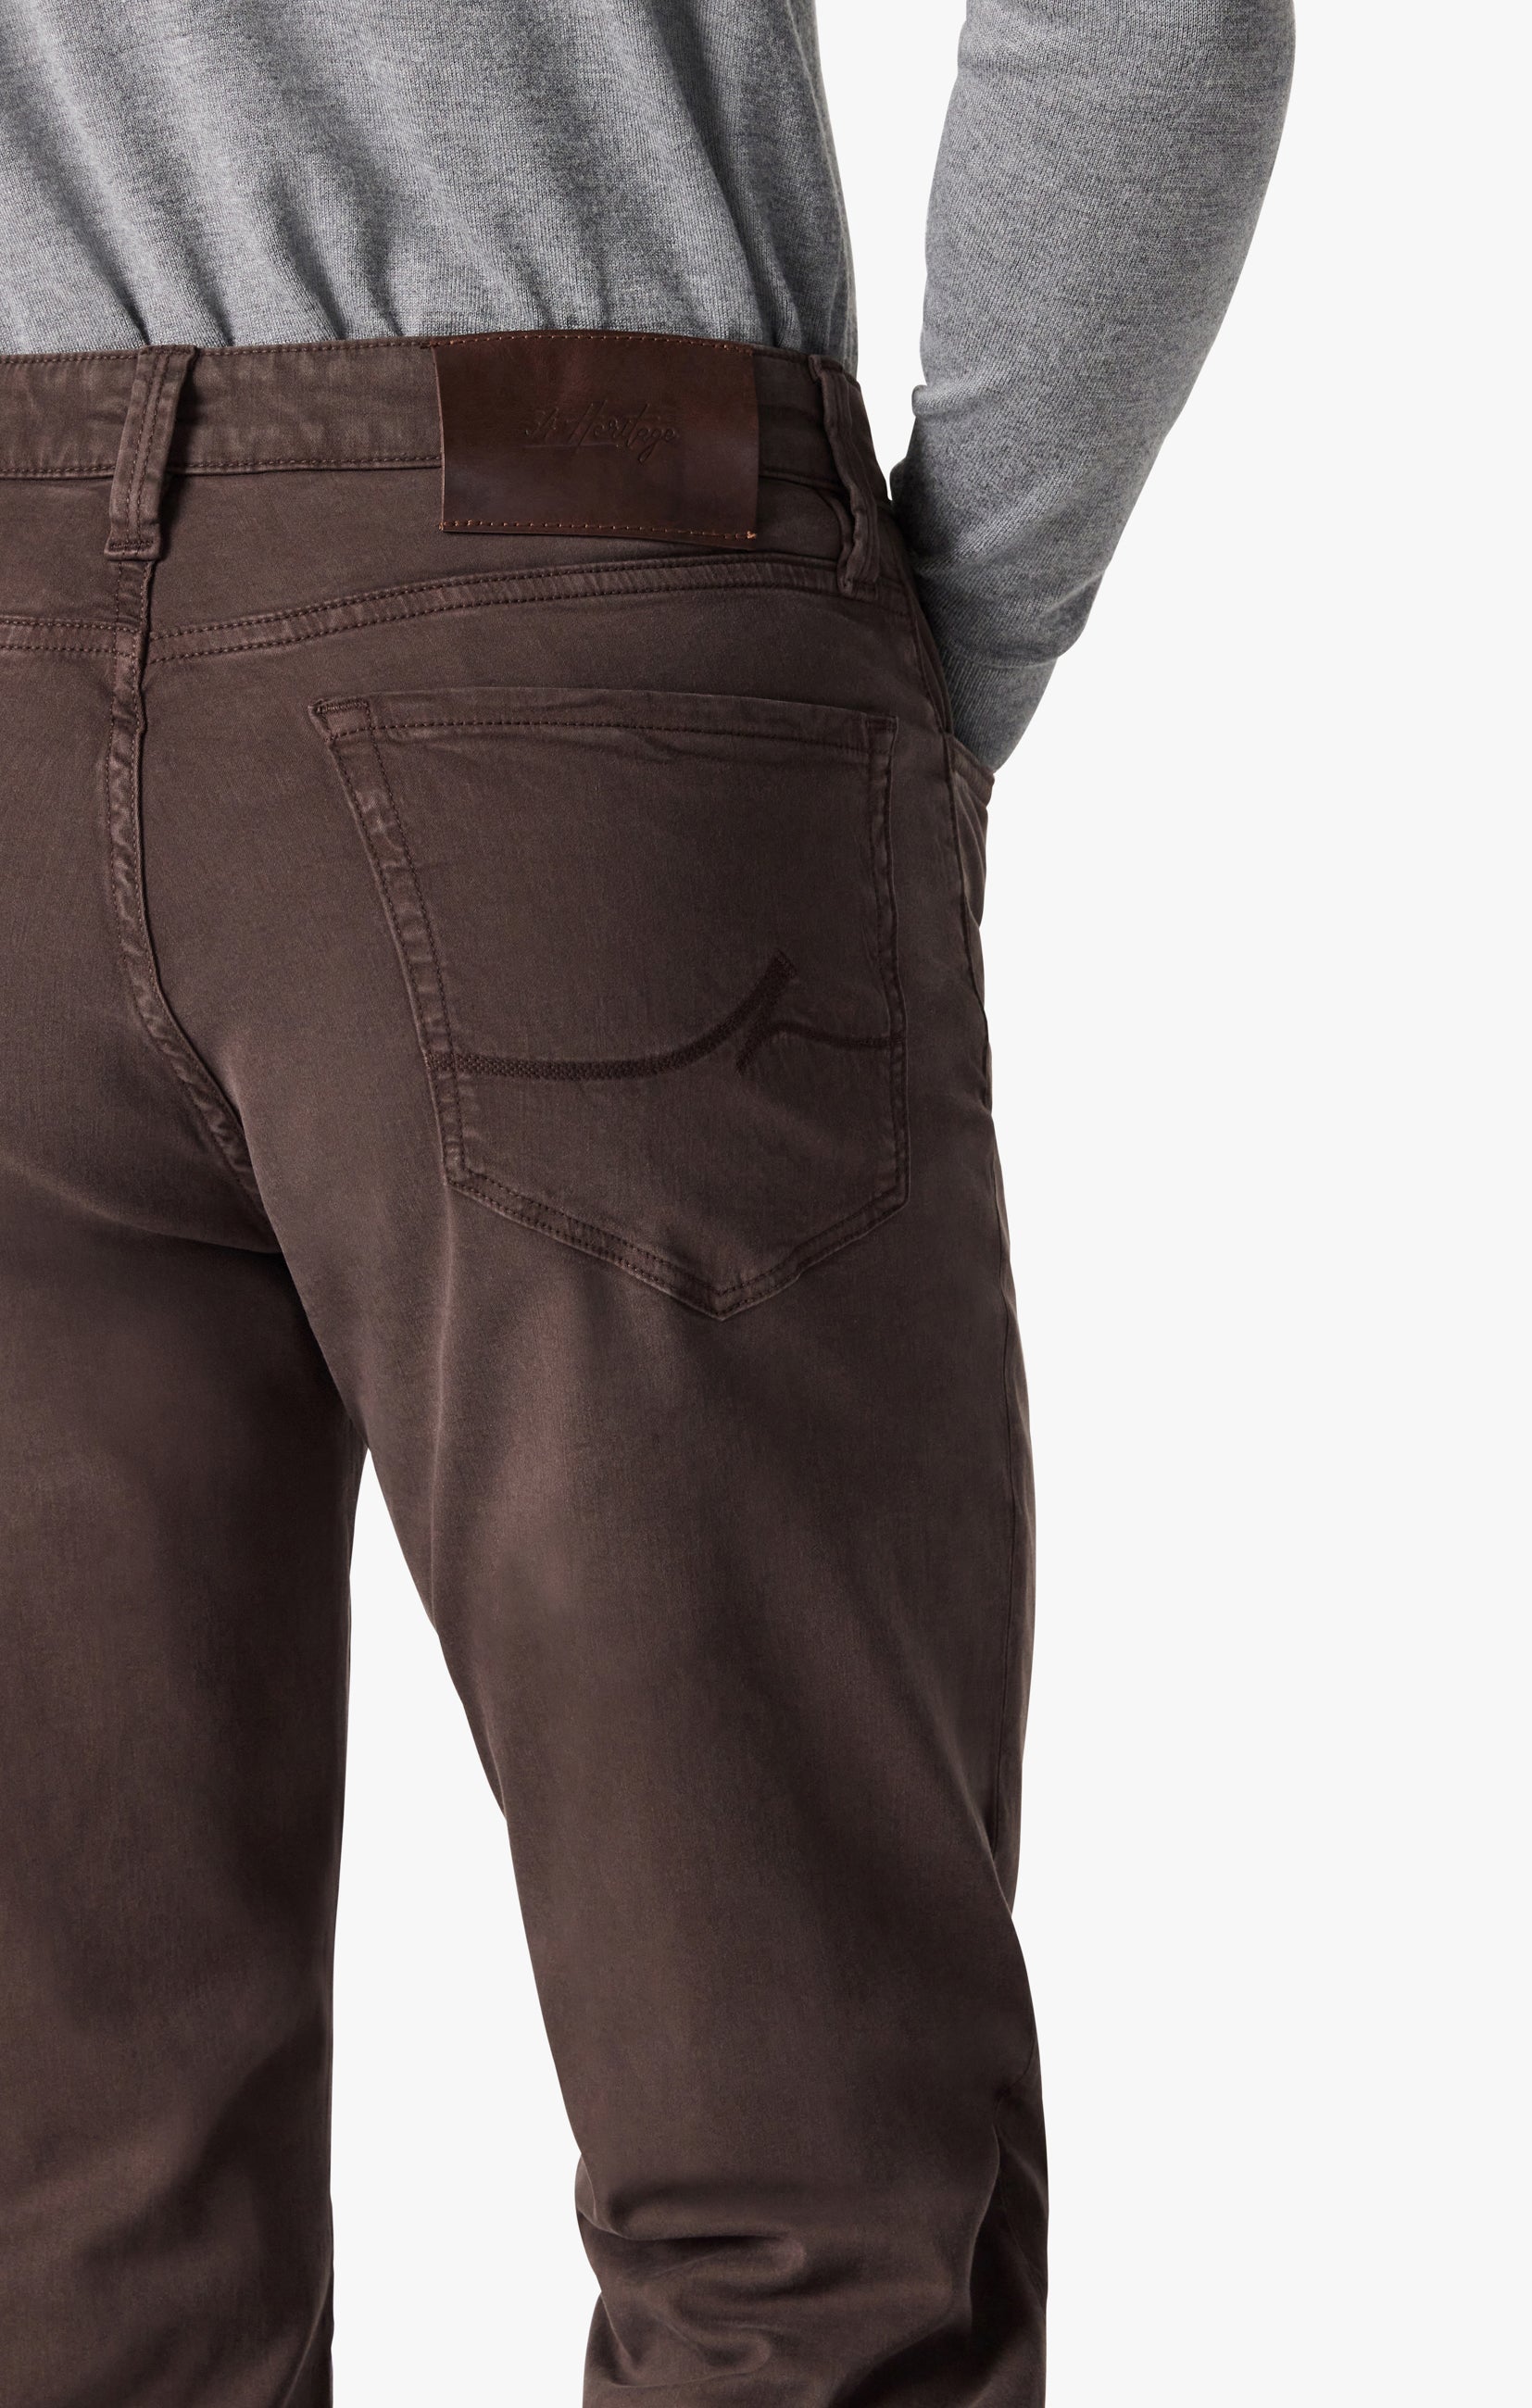 Charisma Relaxed Straight Leg Pants In Fudge Twill Image 5